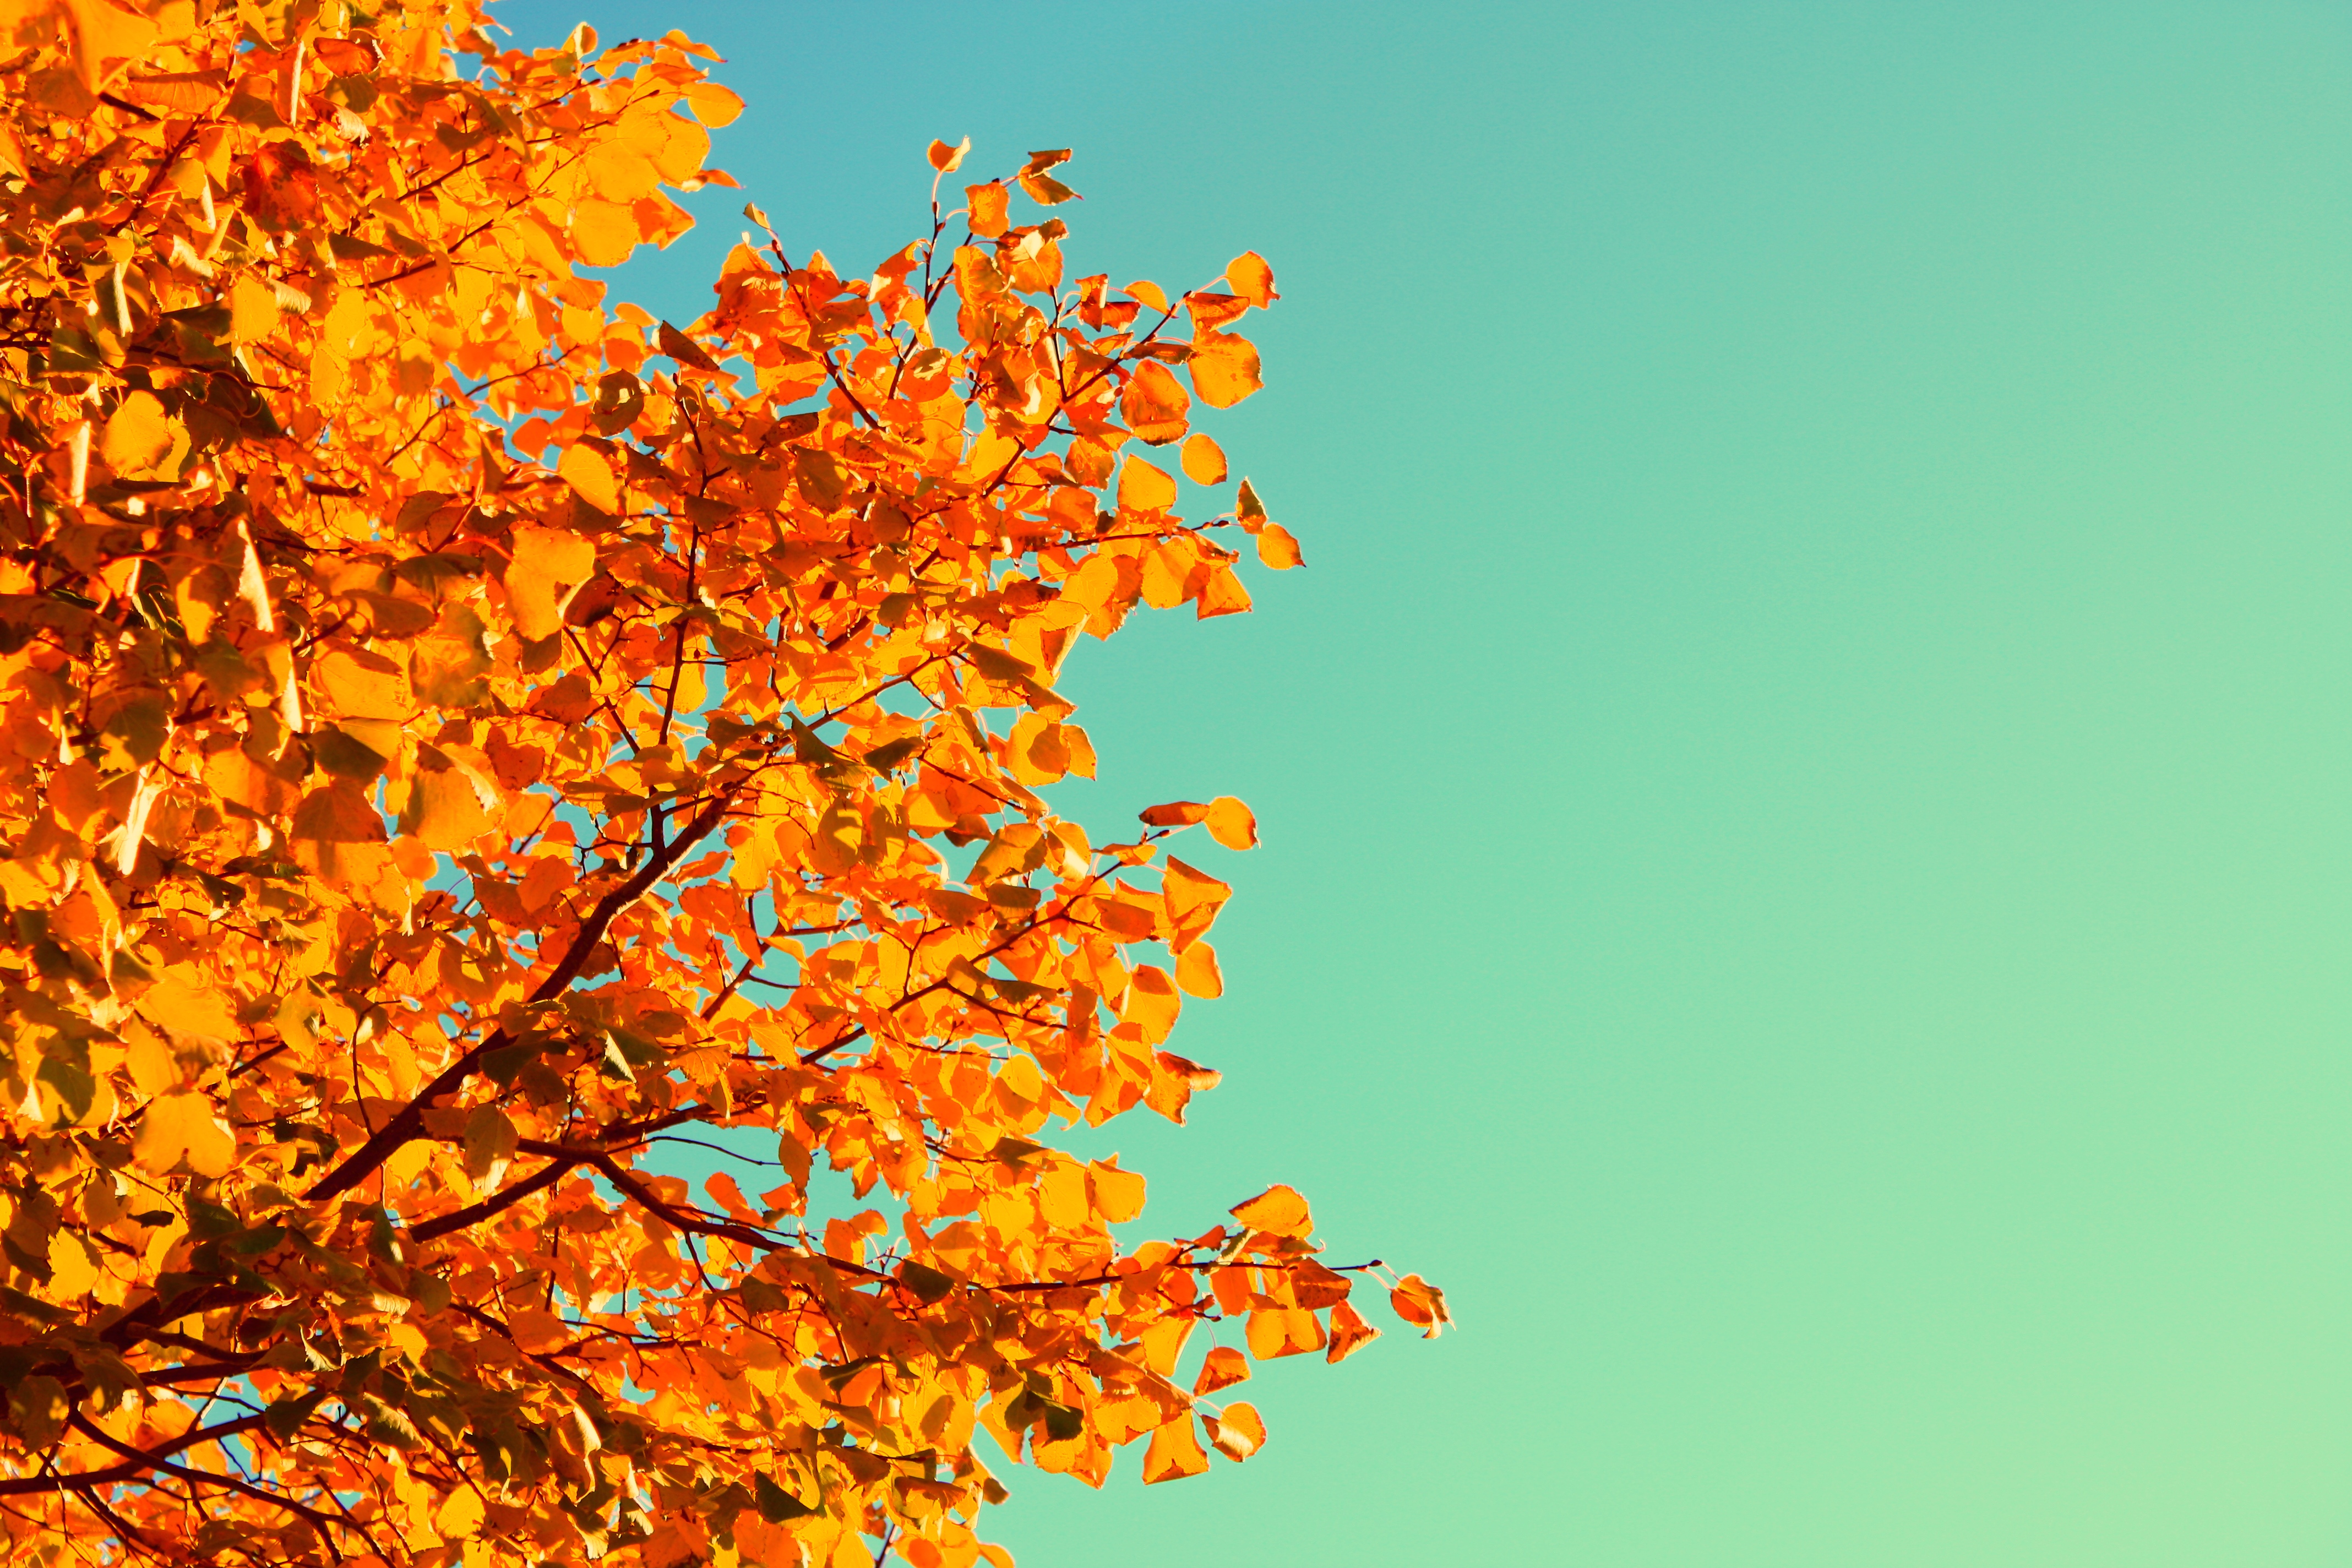 Five Simple Ways to Celebrate the Autumn Equinox | Molly Khan